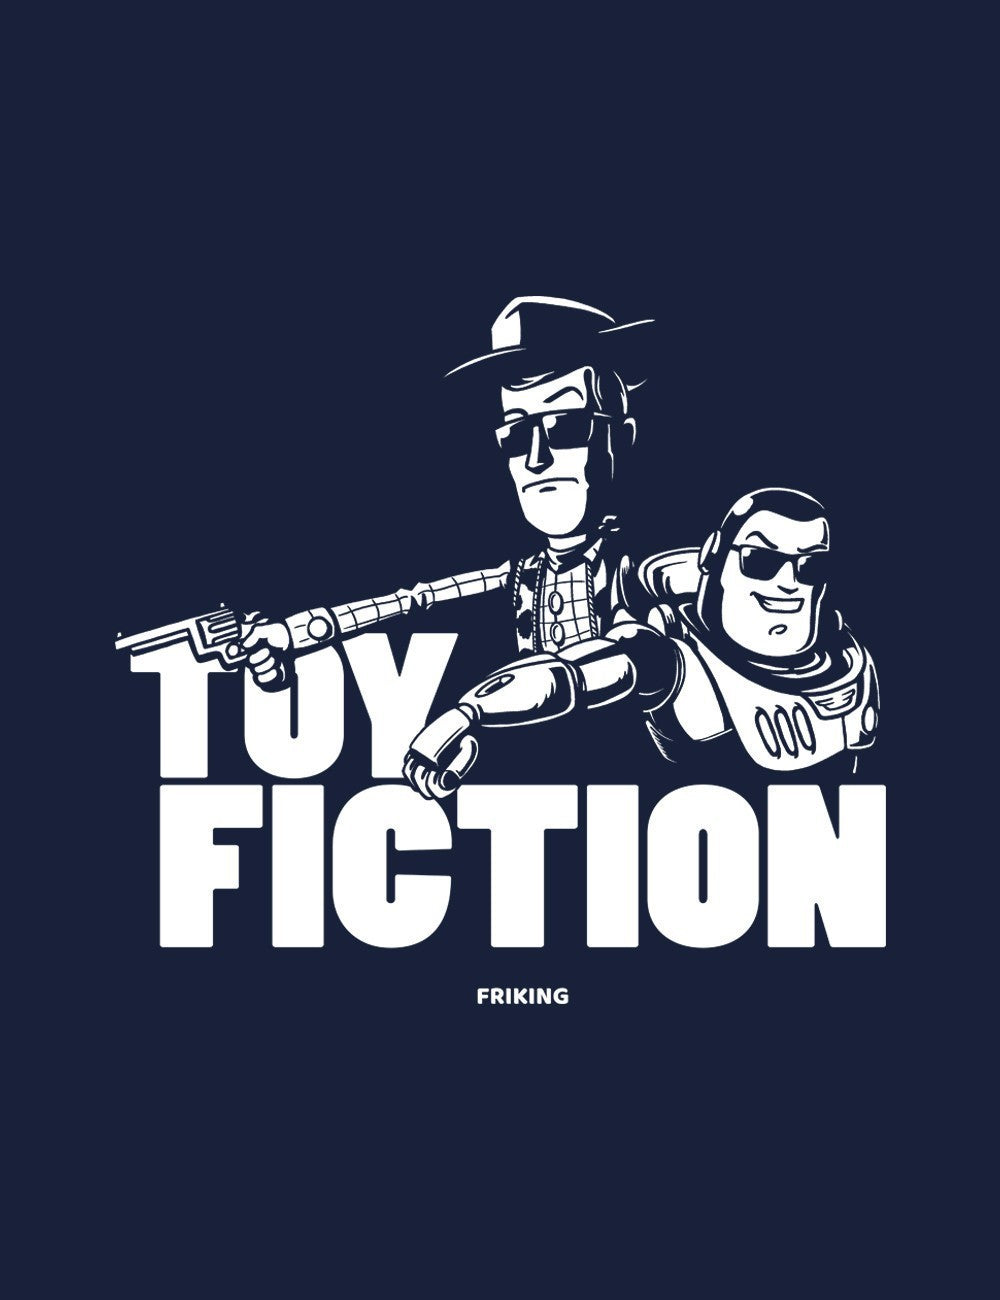  Toy fiction 